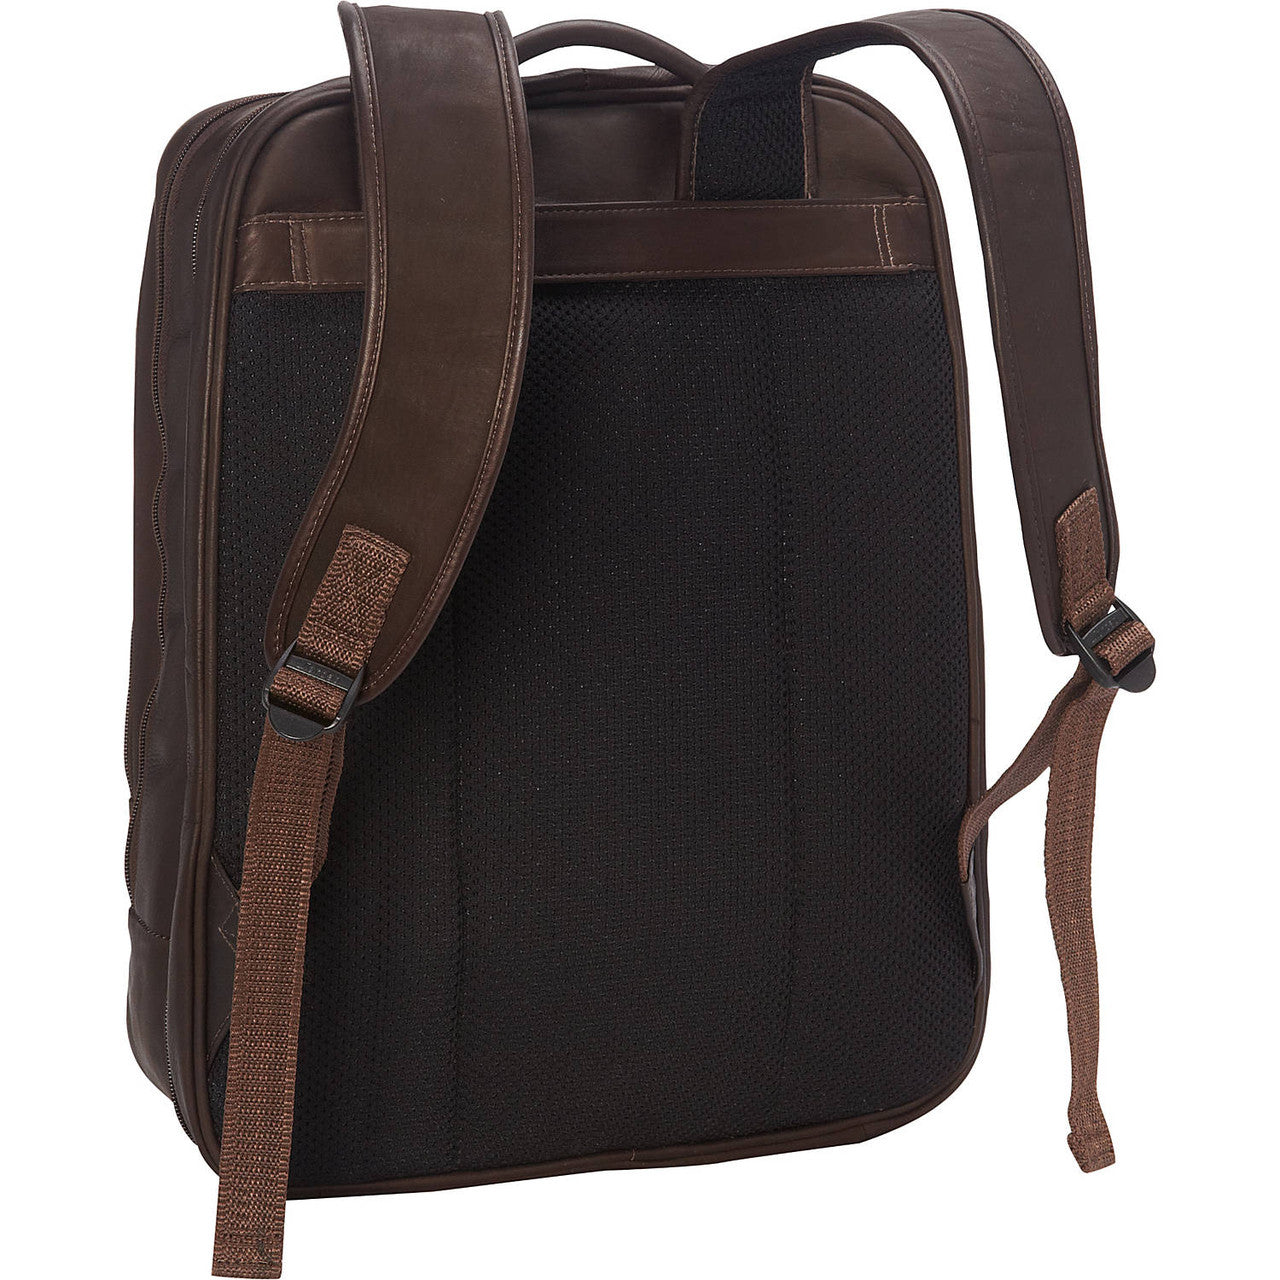 XL Laptop Travel Backpack - Leather Loom